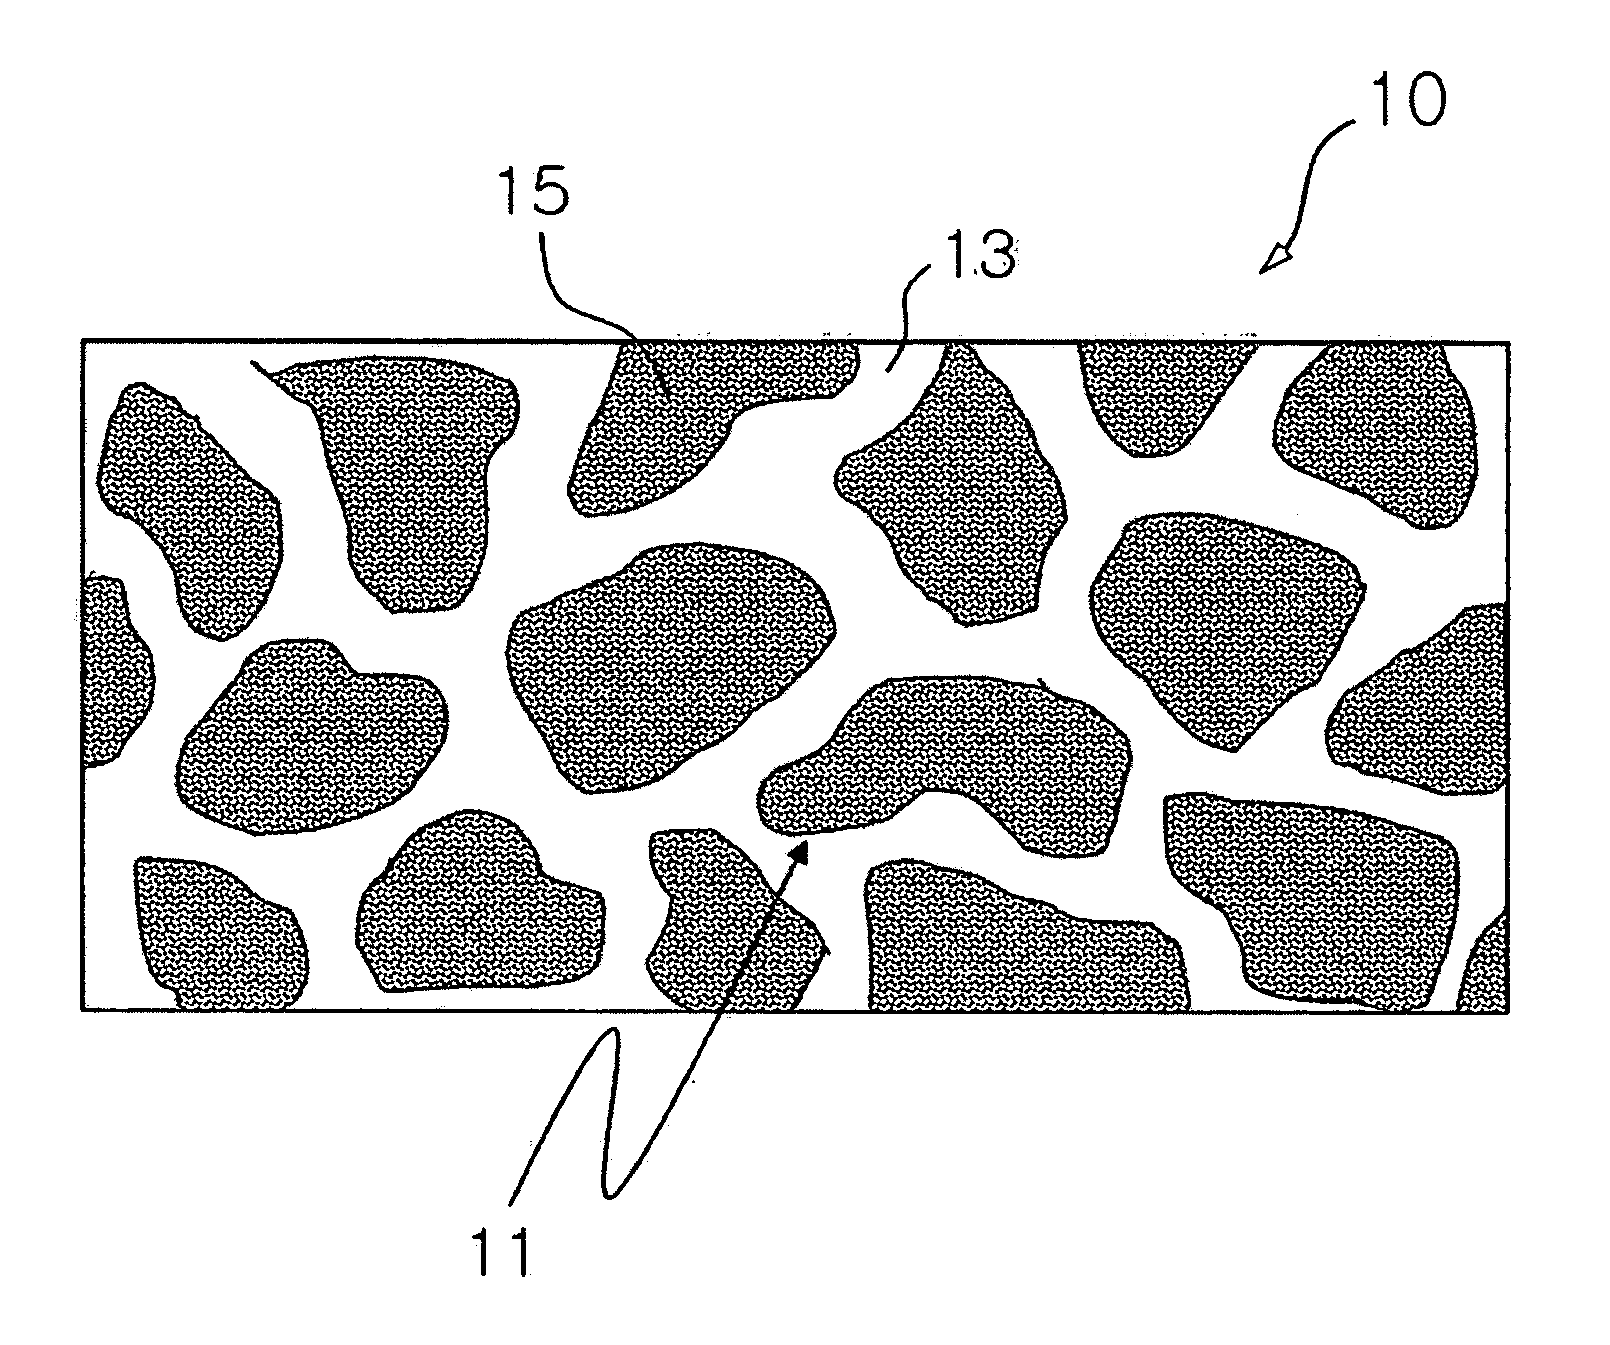 Polymer electrolyte membrane for fuel cell and method for preparing the same